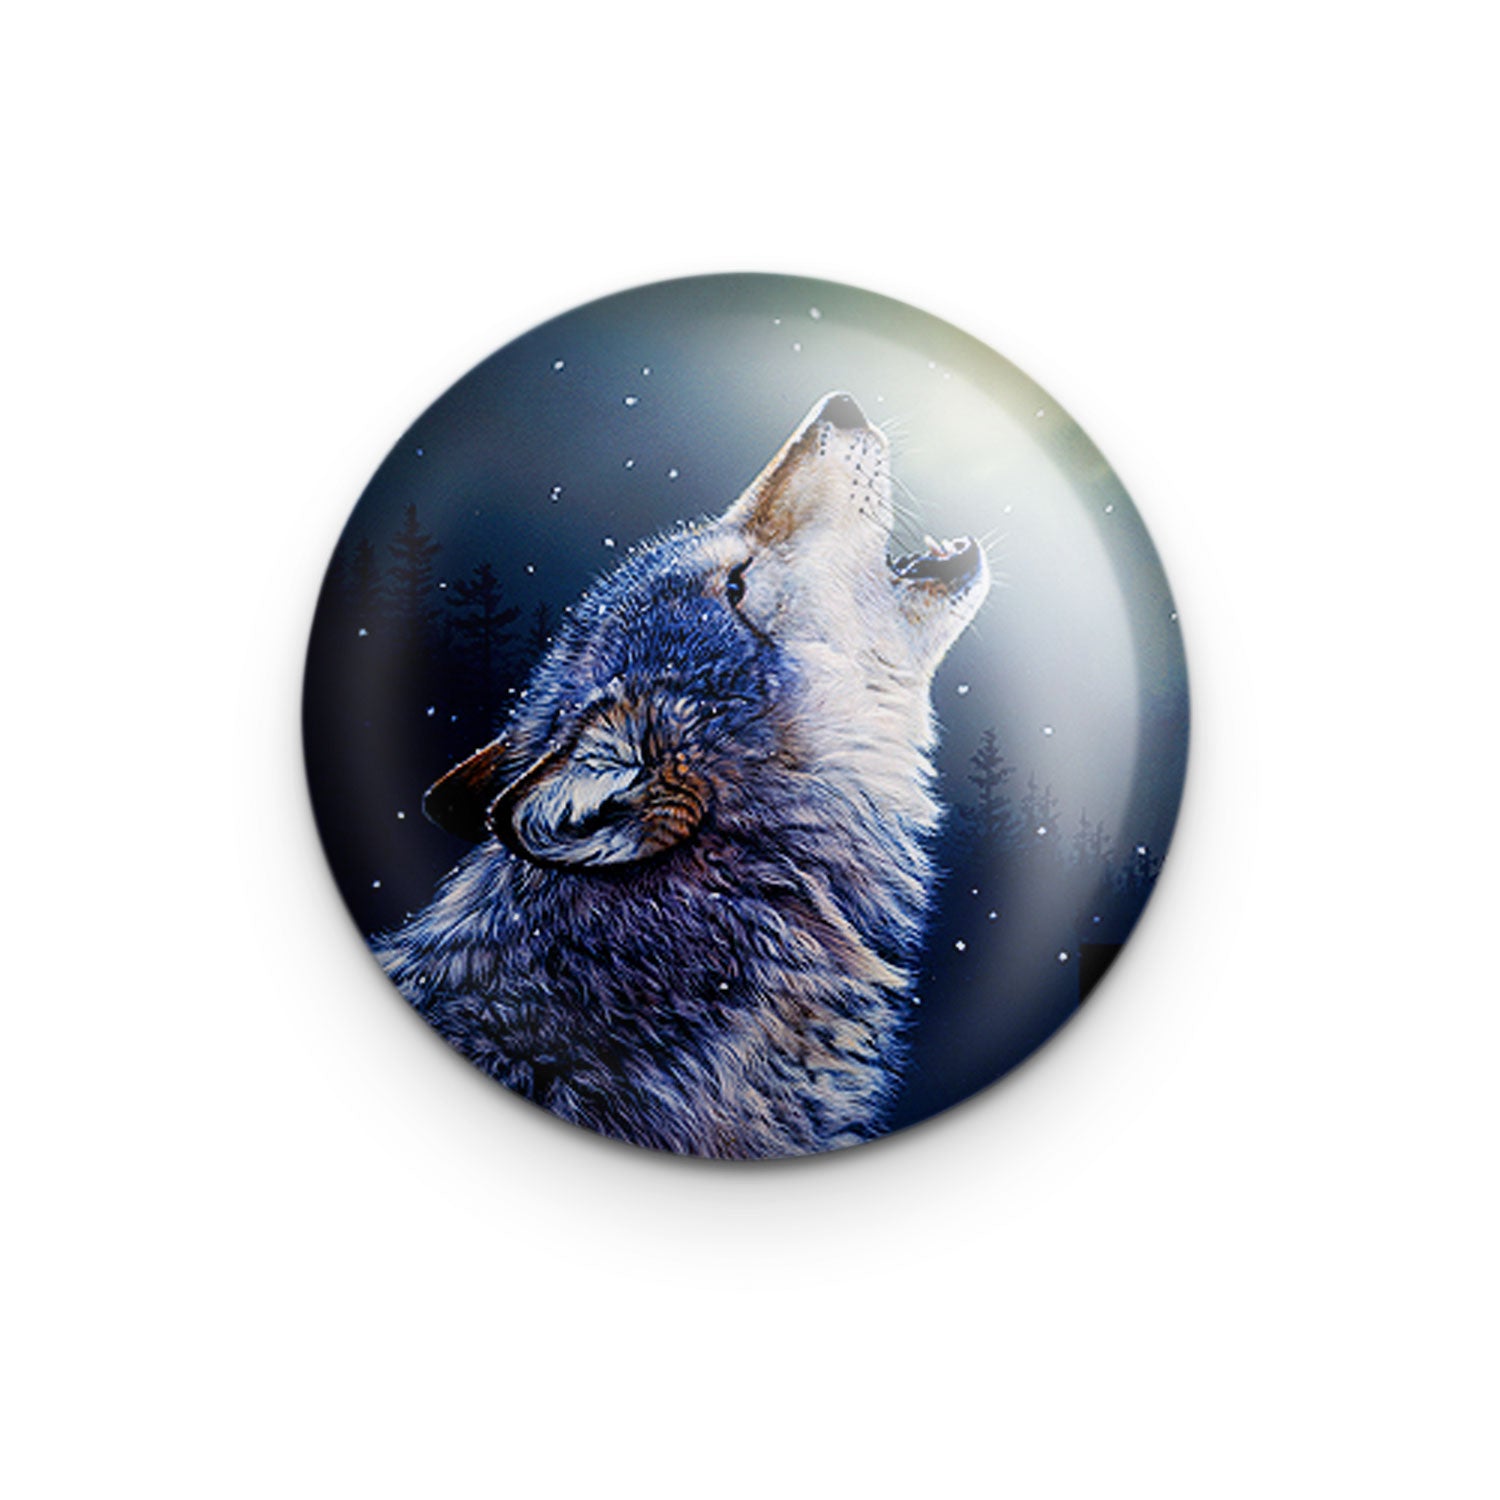 "Ascending Song" - 1" Round Pinback Button